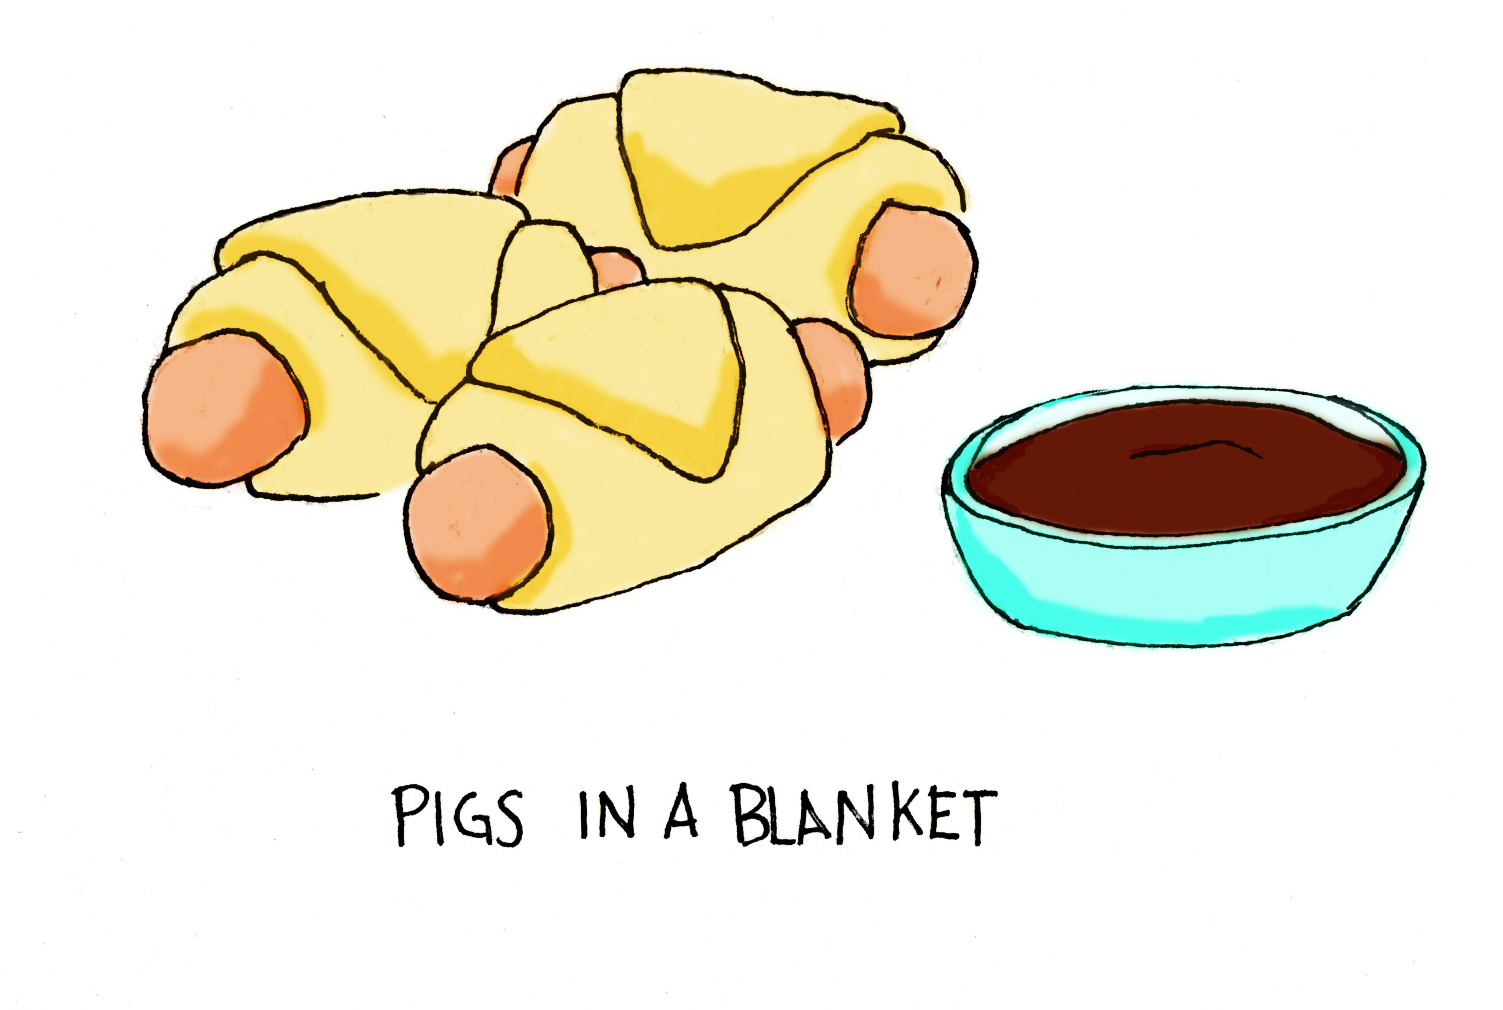 appetizers clipart drawing